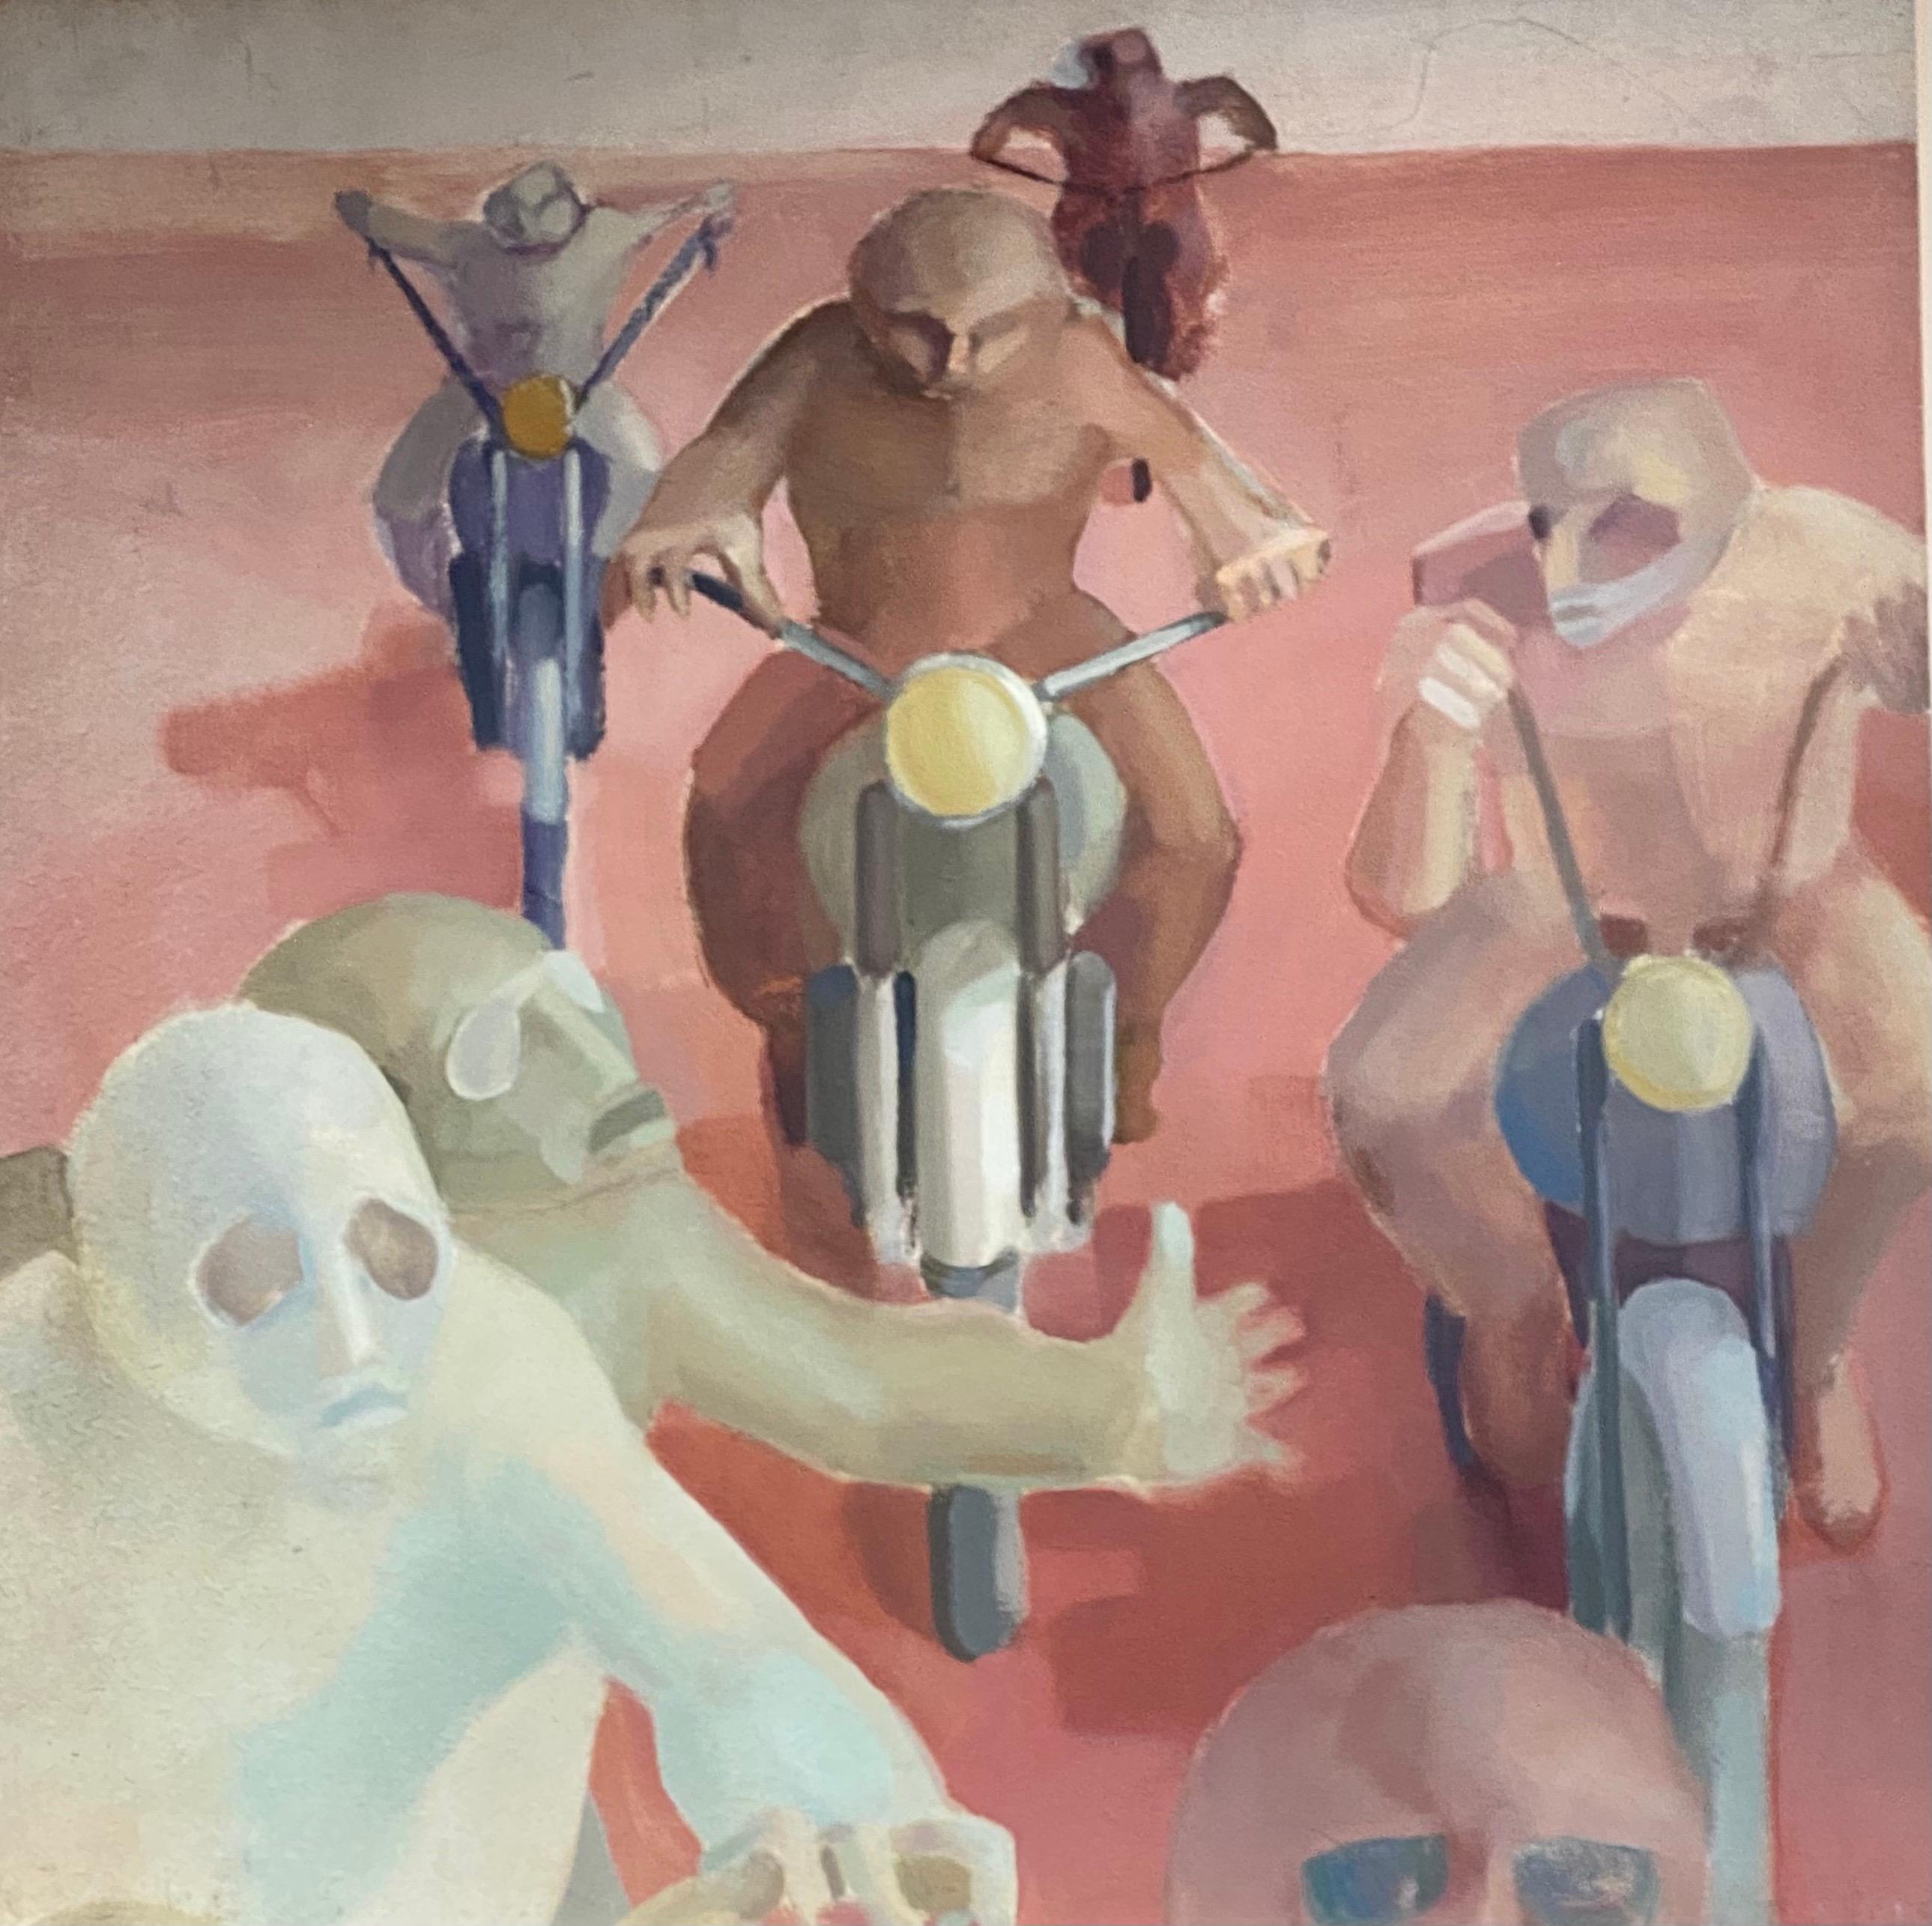 Andres Abstract Painting - Male Bikers in Desert - Huge French Surrealist Oil Painting Figurative Scene 